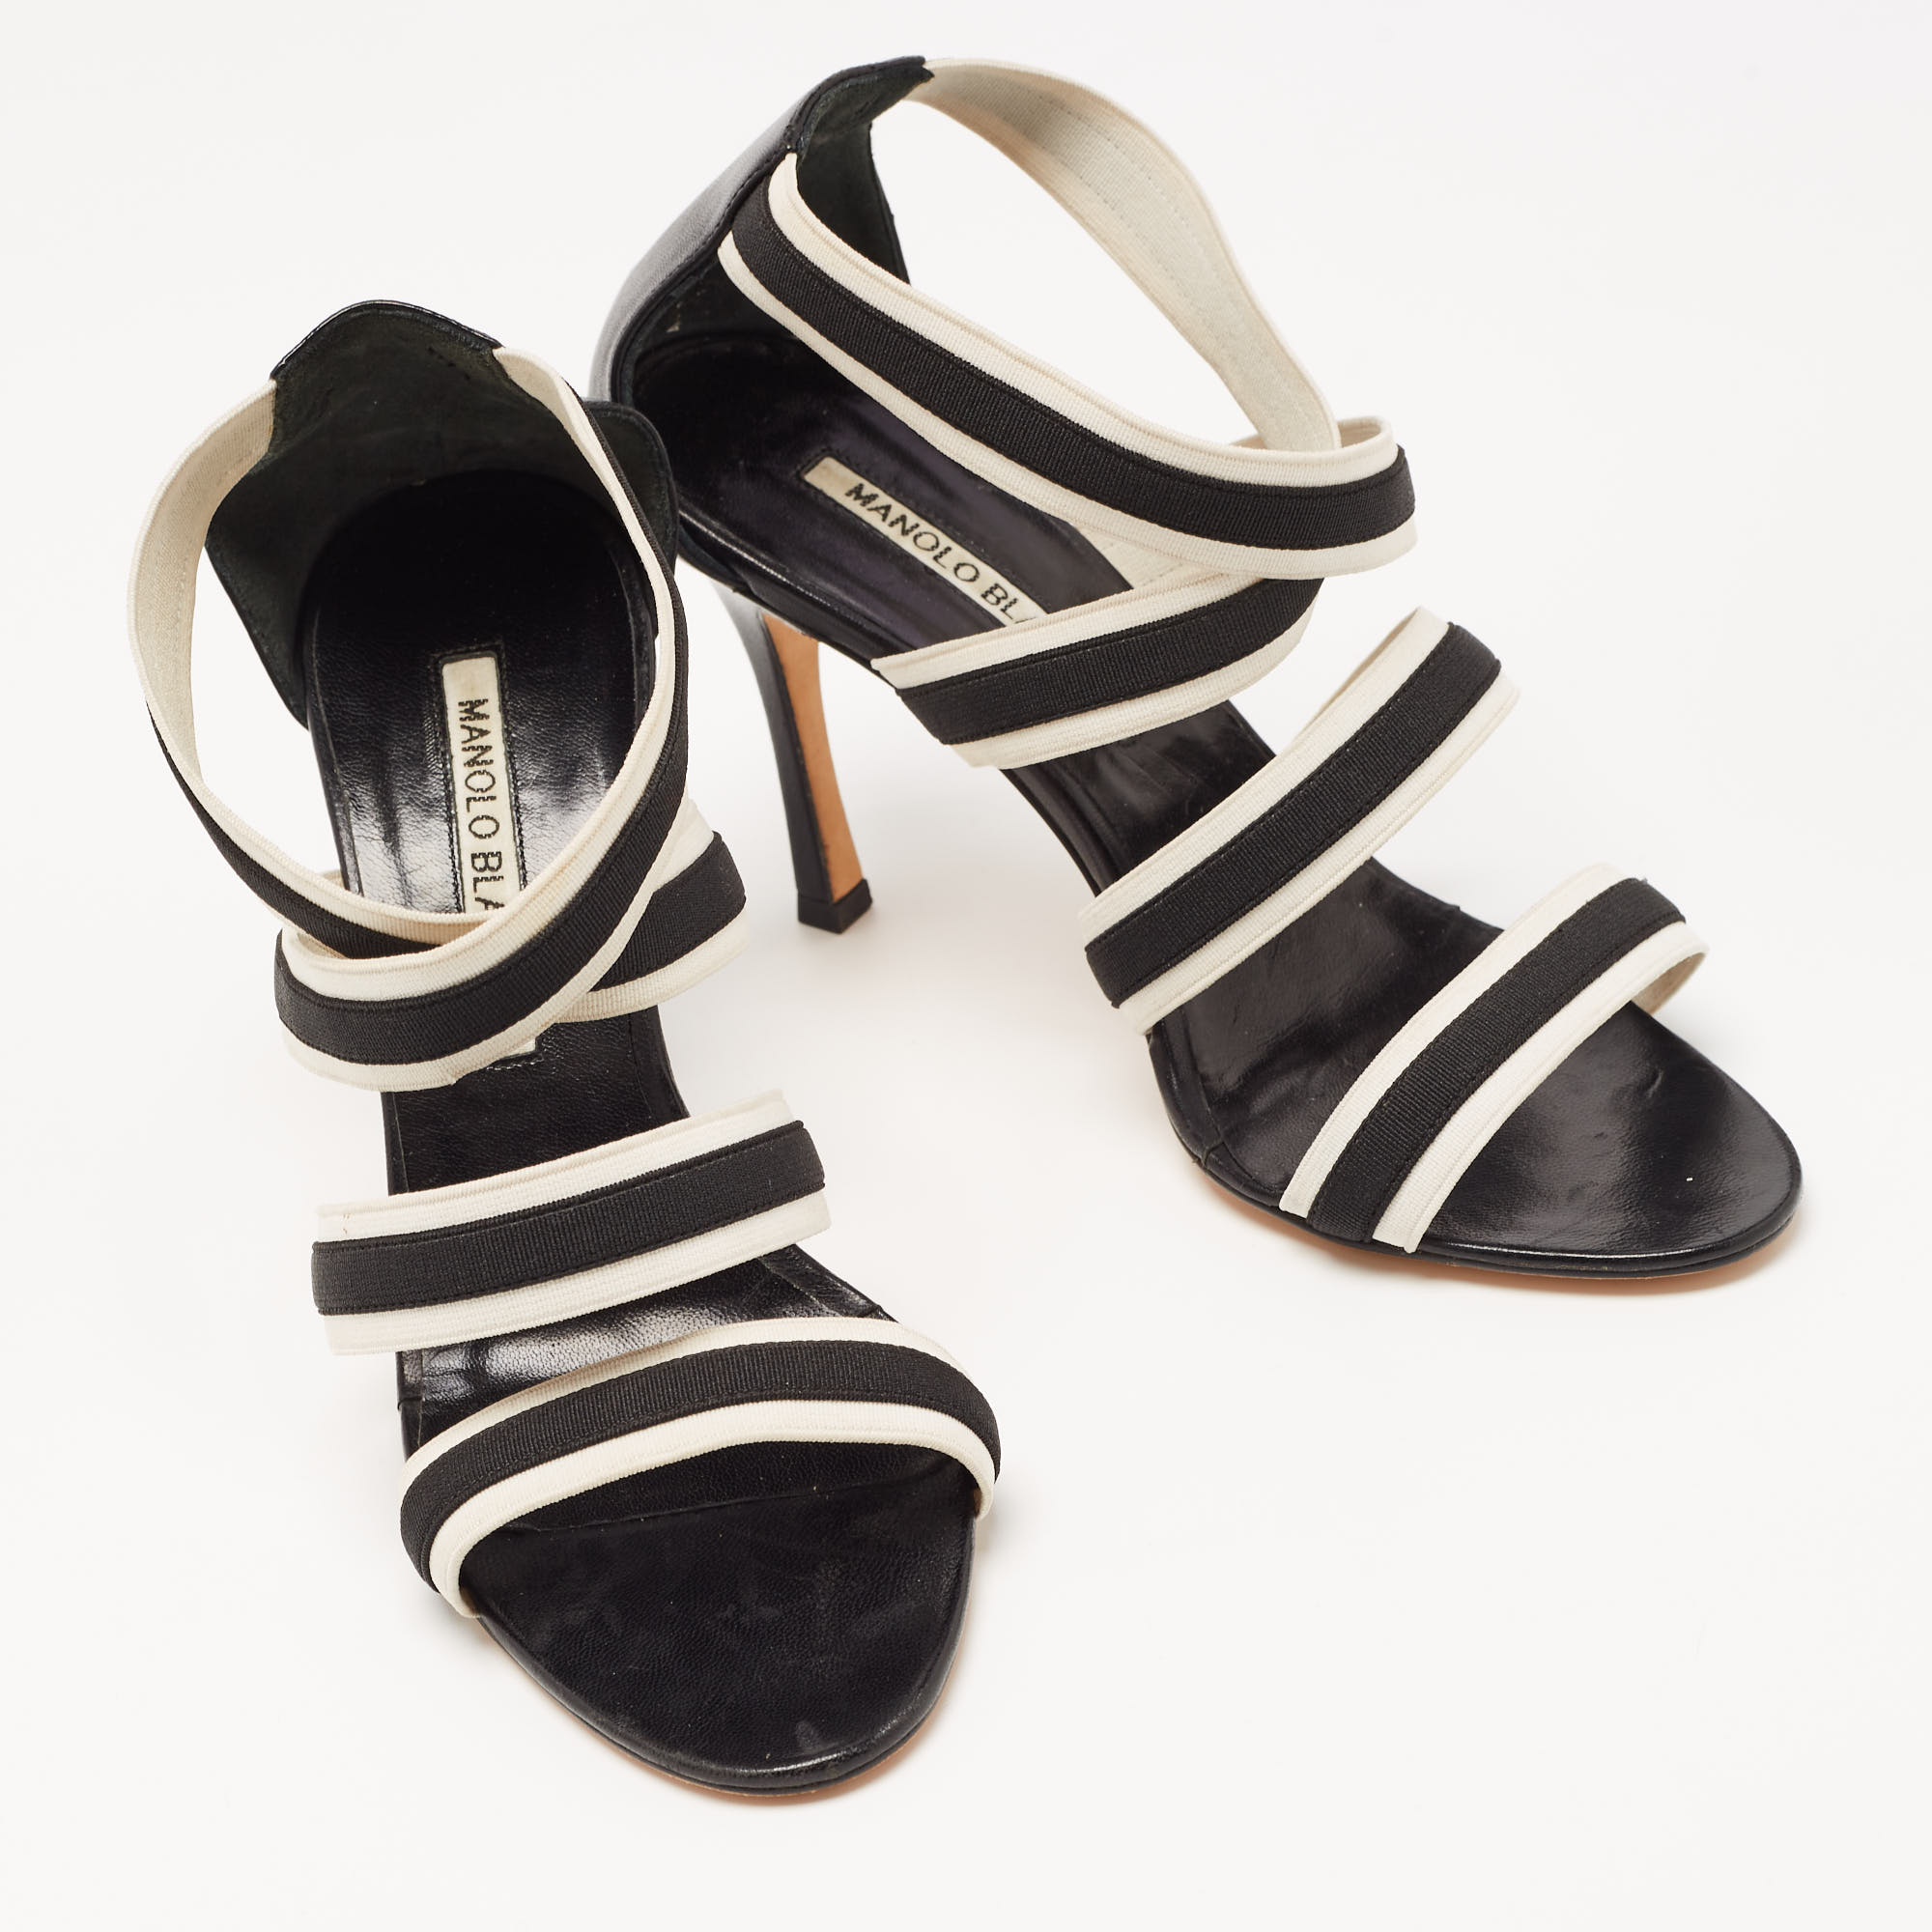 Manolo Blahnik Black/White Striped Elastic And Leather Ankle Strap Sandals Size 36